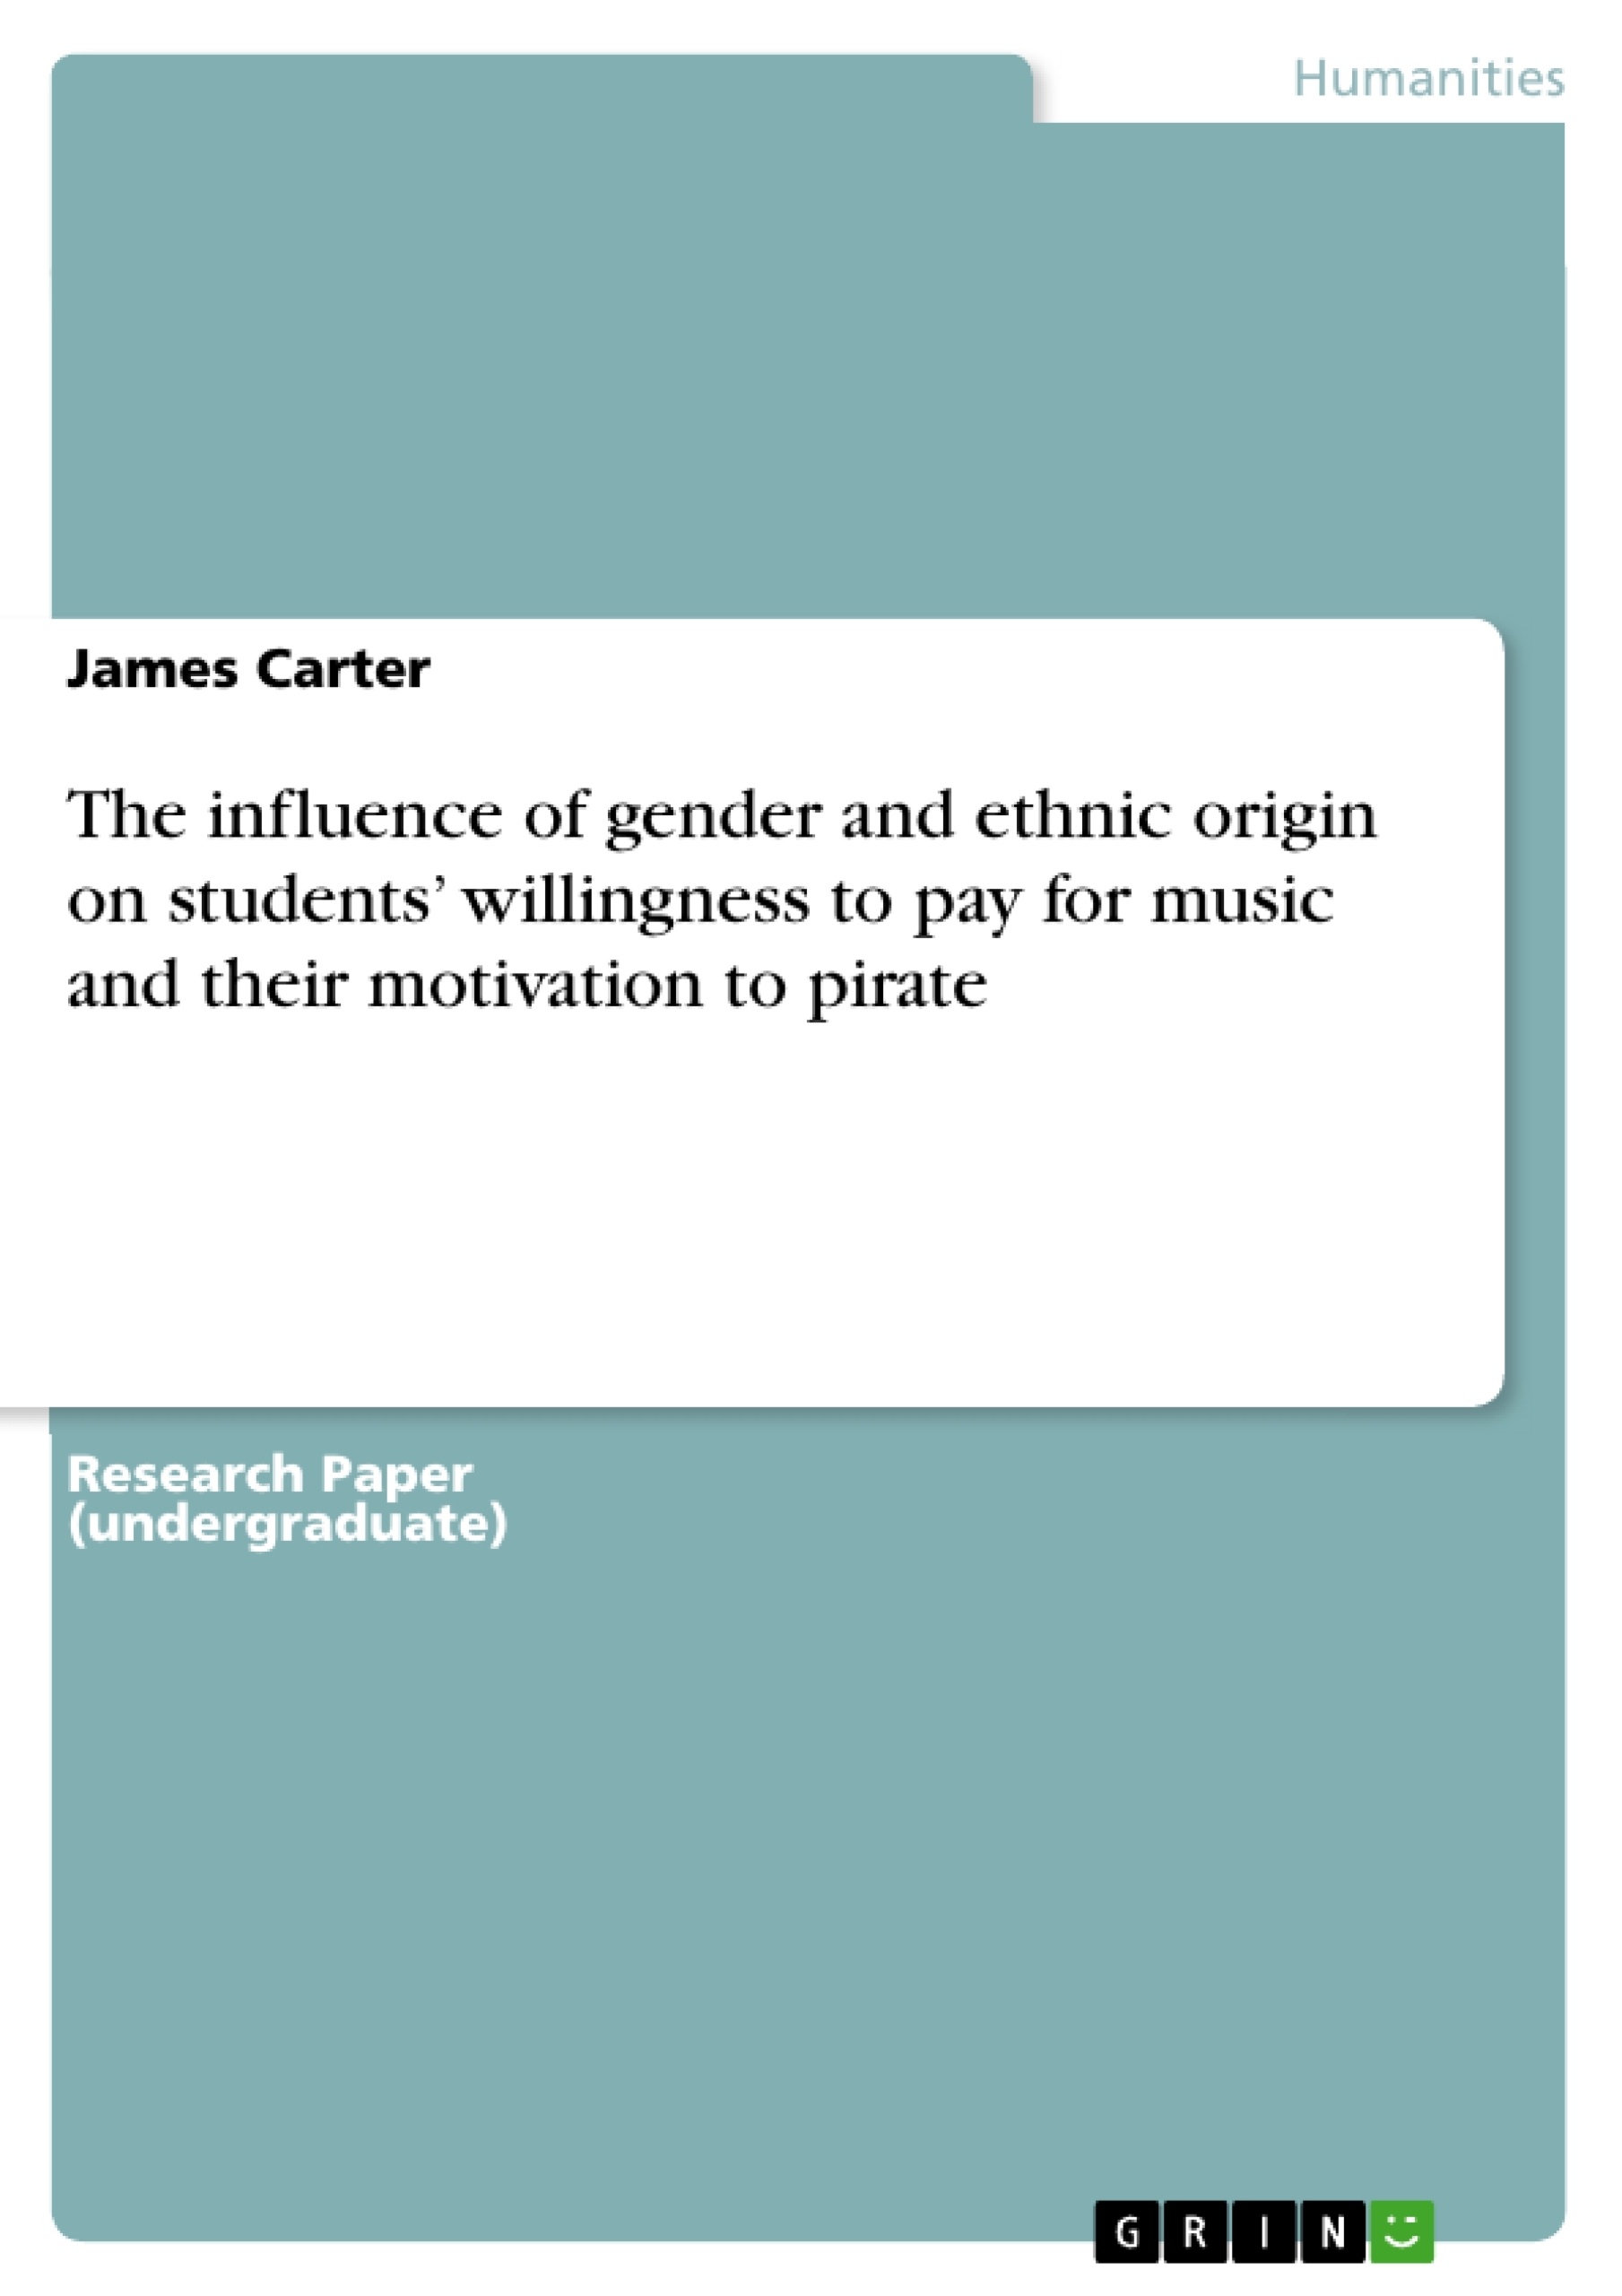 Titel: The influence of gender and ethnic origin on students’ willingness to pay for music and their motivation to pirate